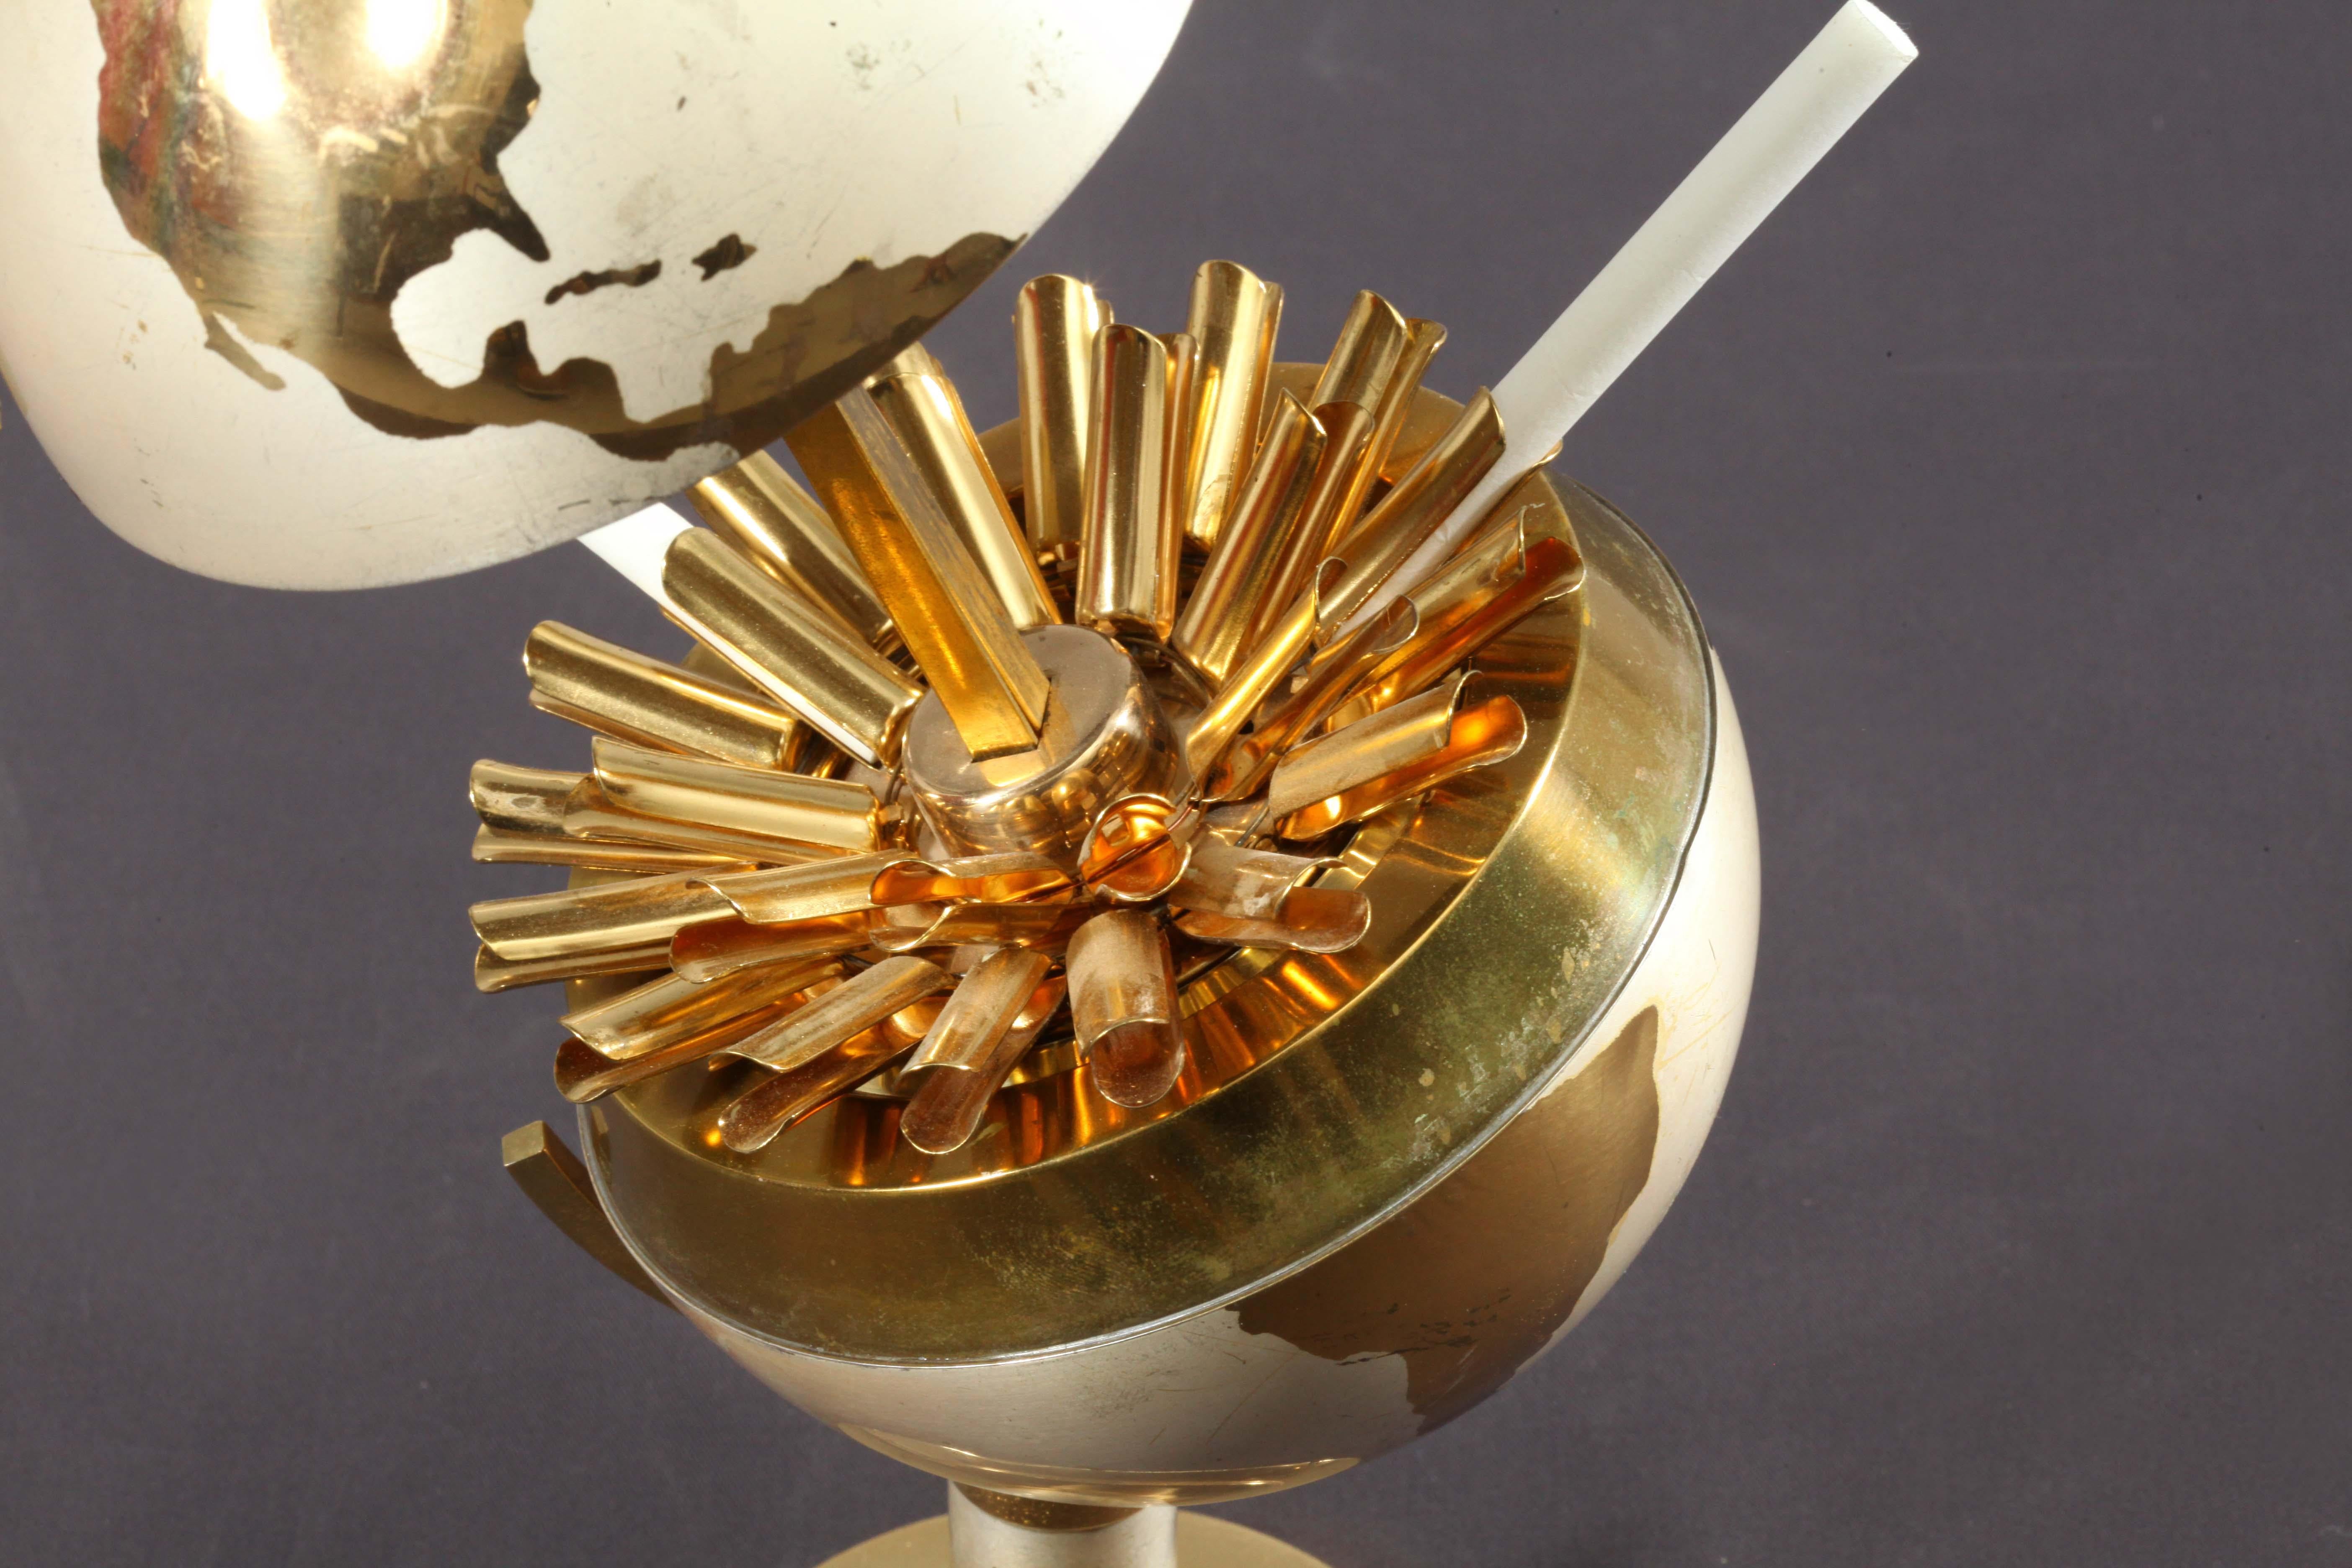 German 20th century vintage cigarette holder or dispenser designed in the shape of a globe composed of solid brass. Its mechanic lifts upwards from a pull-ring on the top splitting it in half at the equator to reveal 25 tubes pop out cigarettes.
An